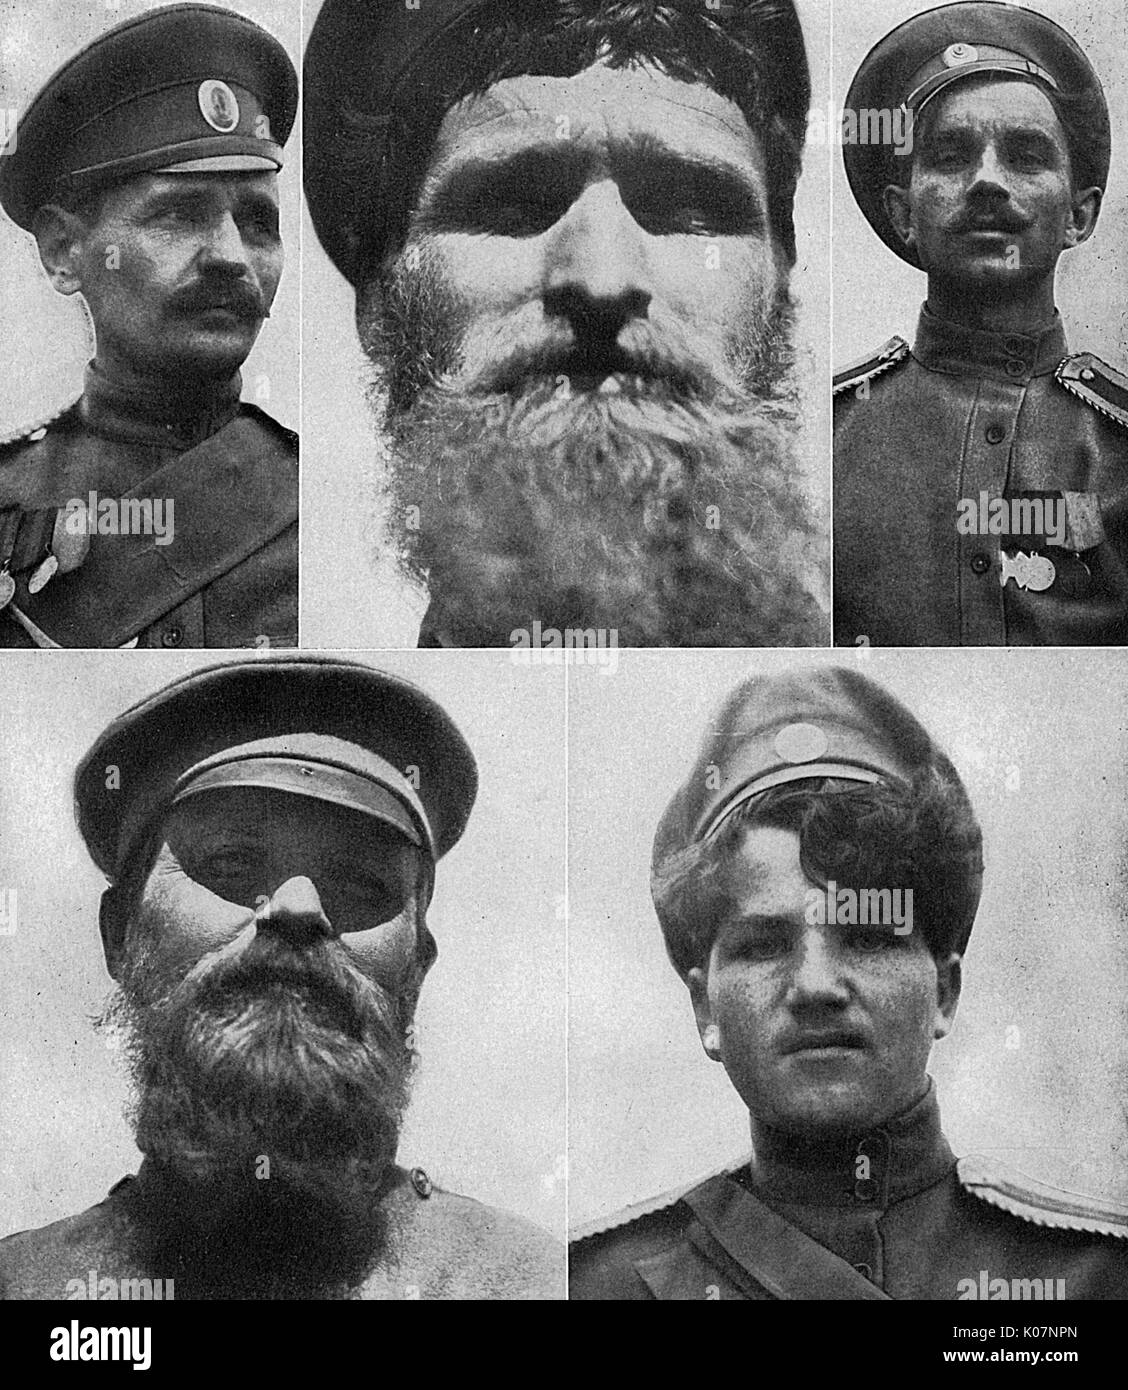 Five types of Russian soldier who fought in the First World War, a mixture of educated (1 and 3), Moujik or peasant (2), Bolshevik (4)  and Cossack (5).      Date: 1917-1918 Stock Photo